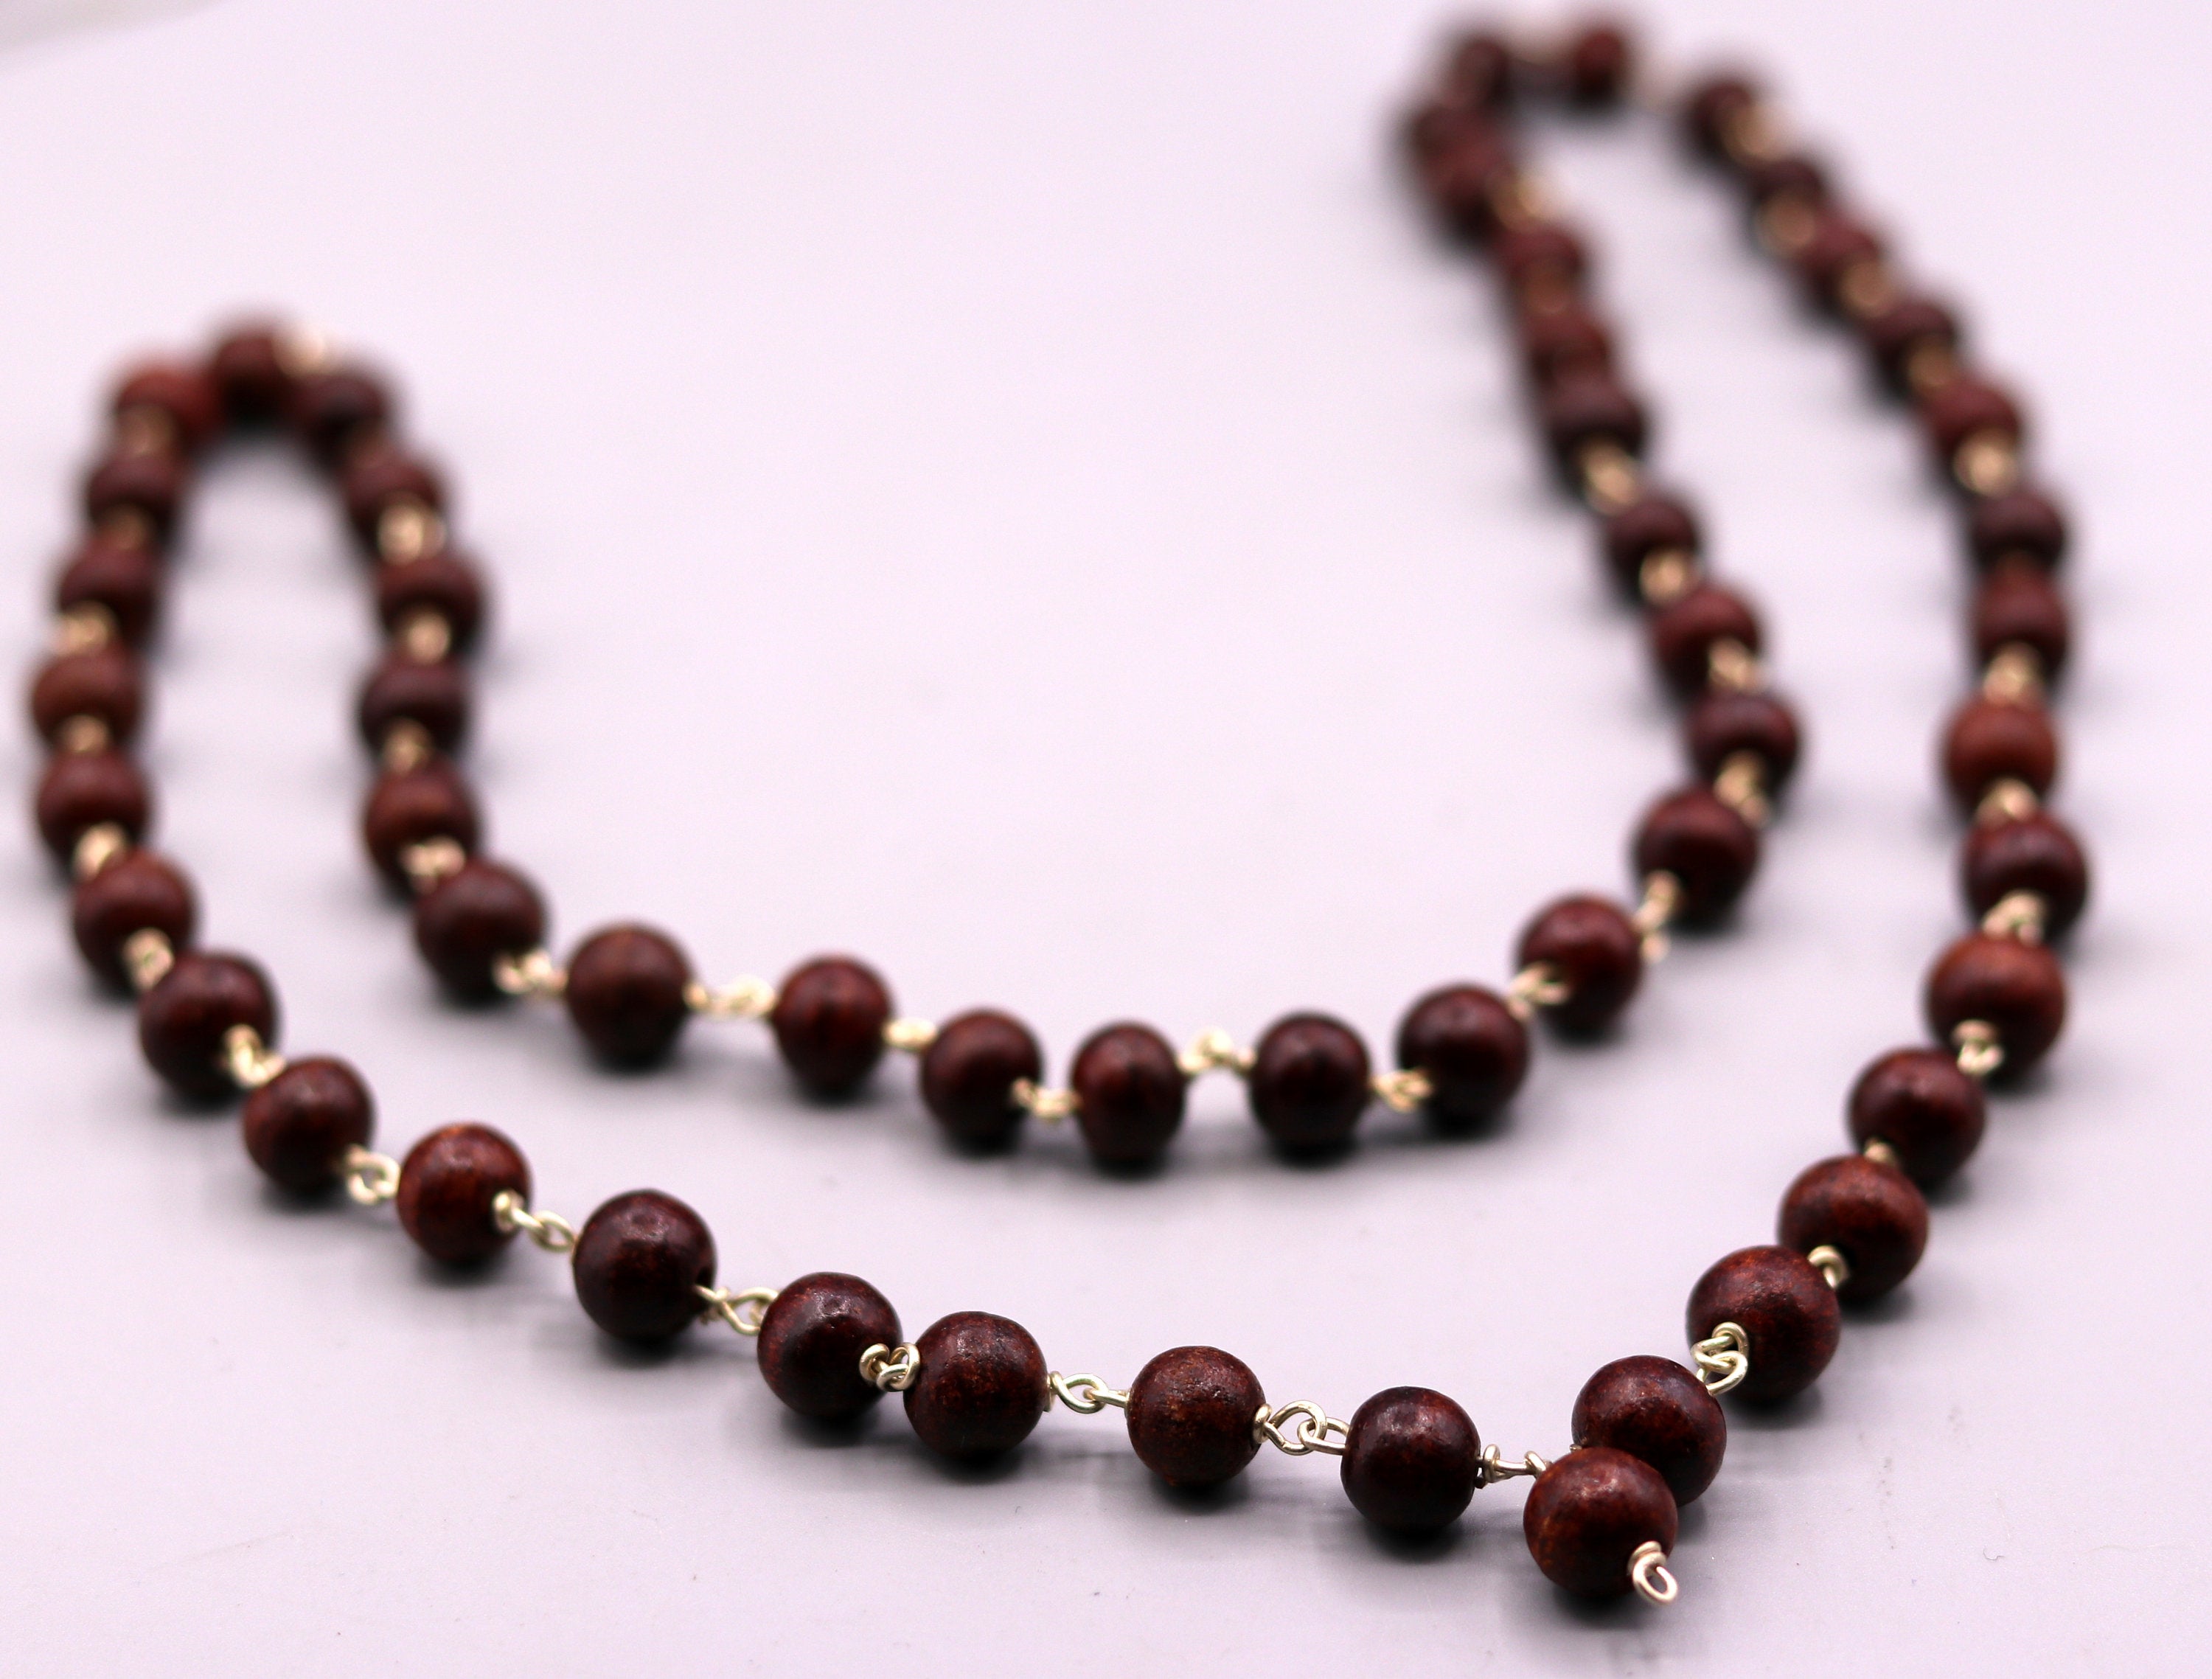 DIY Wood Bead Necklace - Positively Splendid {Crafts, Sewing, Recipes and  Home Decor}